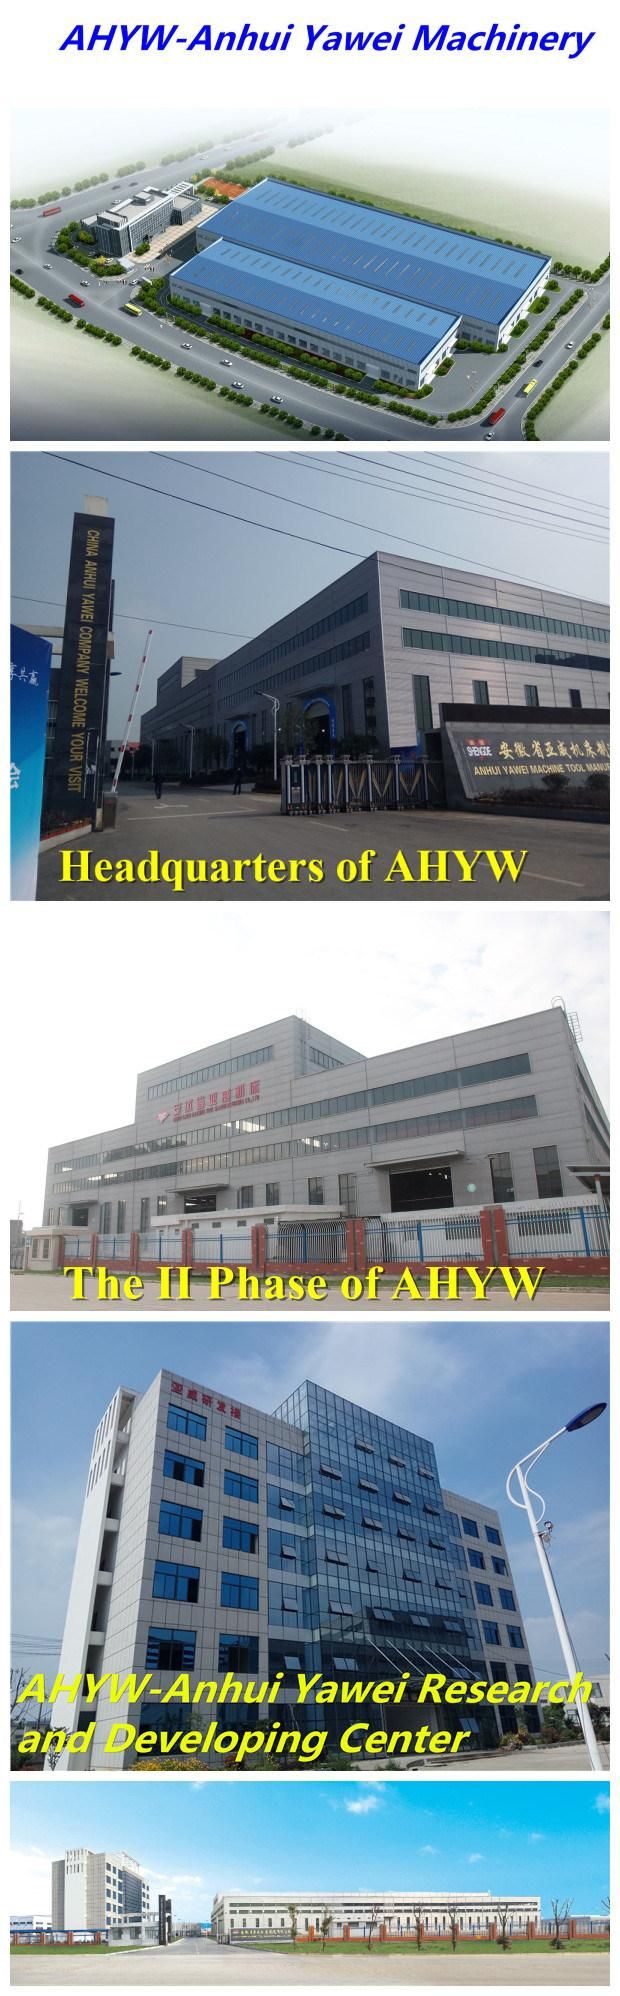 Steel Plate Guillotine Machine From Anhui Yawei with Ahyw Logo for Metal Sheet Cutting